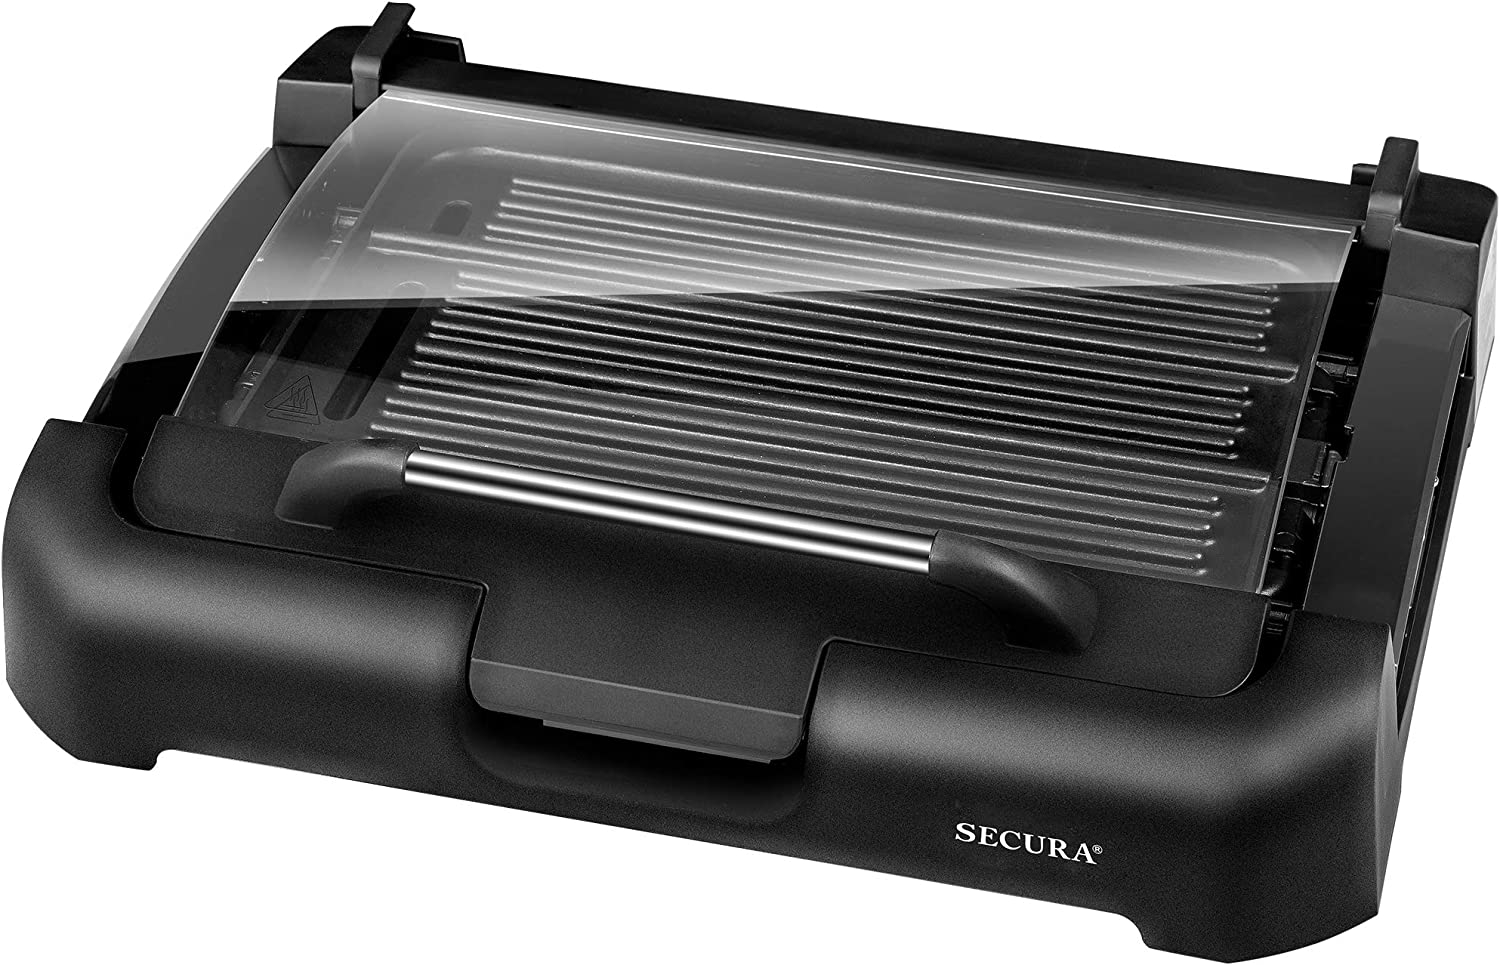 Secura Smokeless Indoor Grill 1800-Watt Electric Griddle with Reversible 2 in 1 Grill and Griddle Plates Plate, Glass Lid, Extra